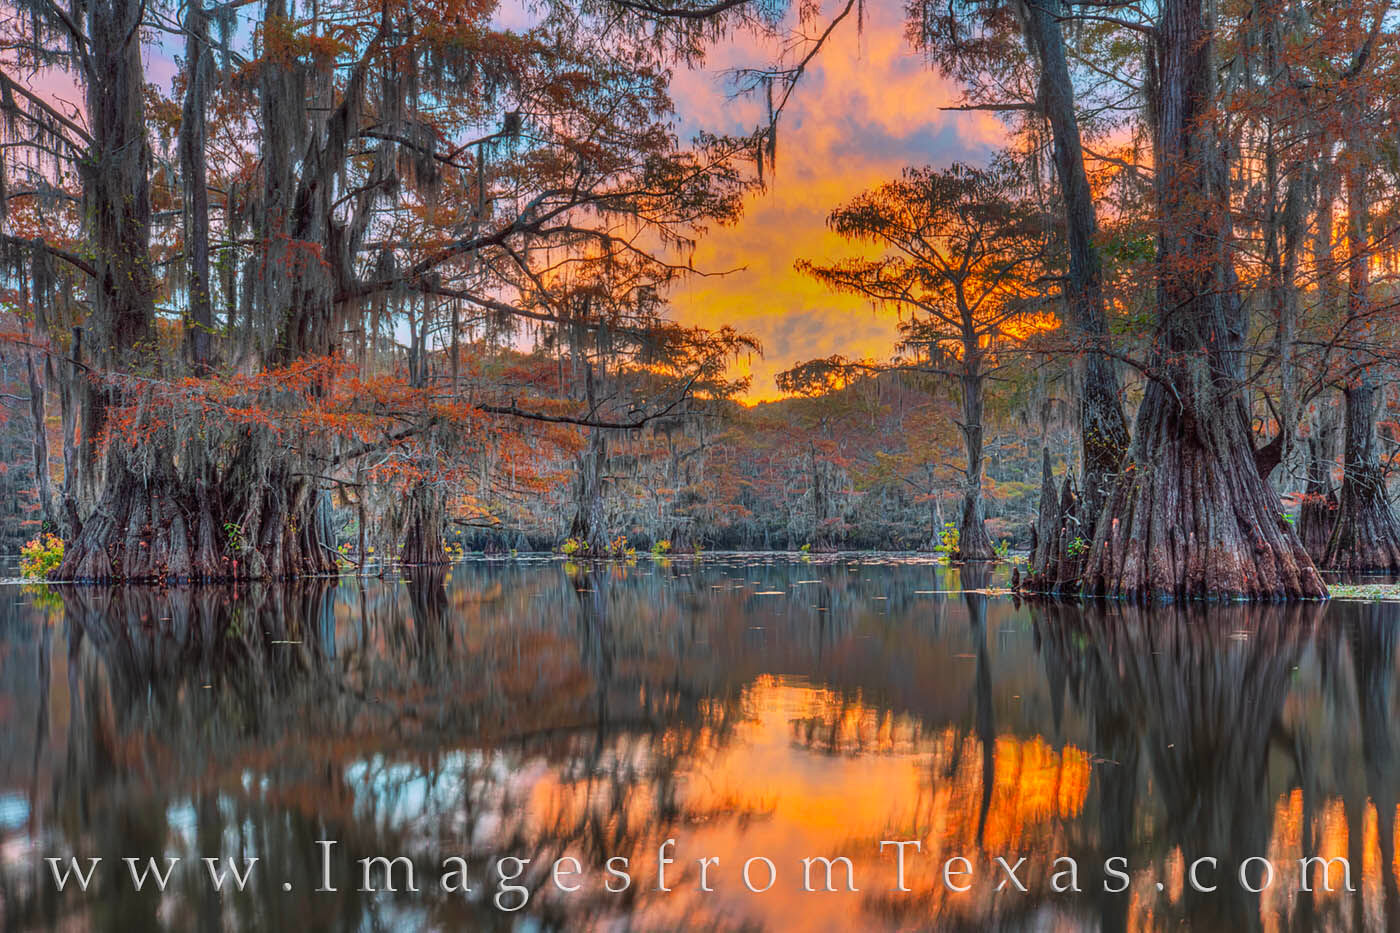 A beautiful sunrise lit up the sky over these old cypress trees on a cool Autumn morning. Fall colors were on display across Caddo Lake.